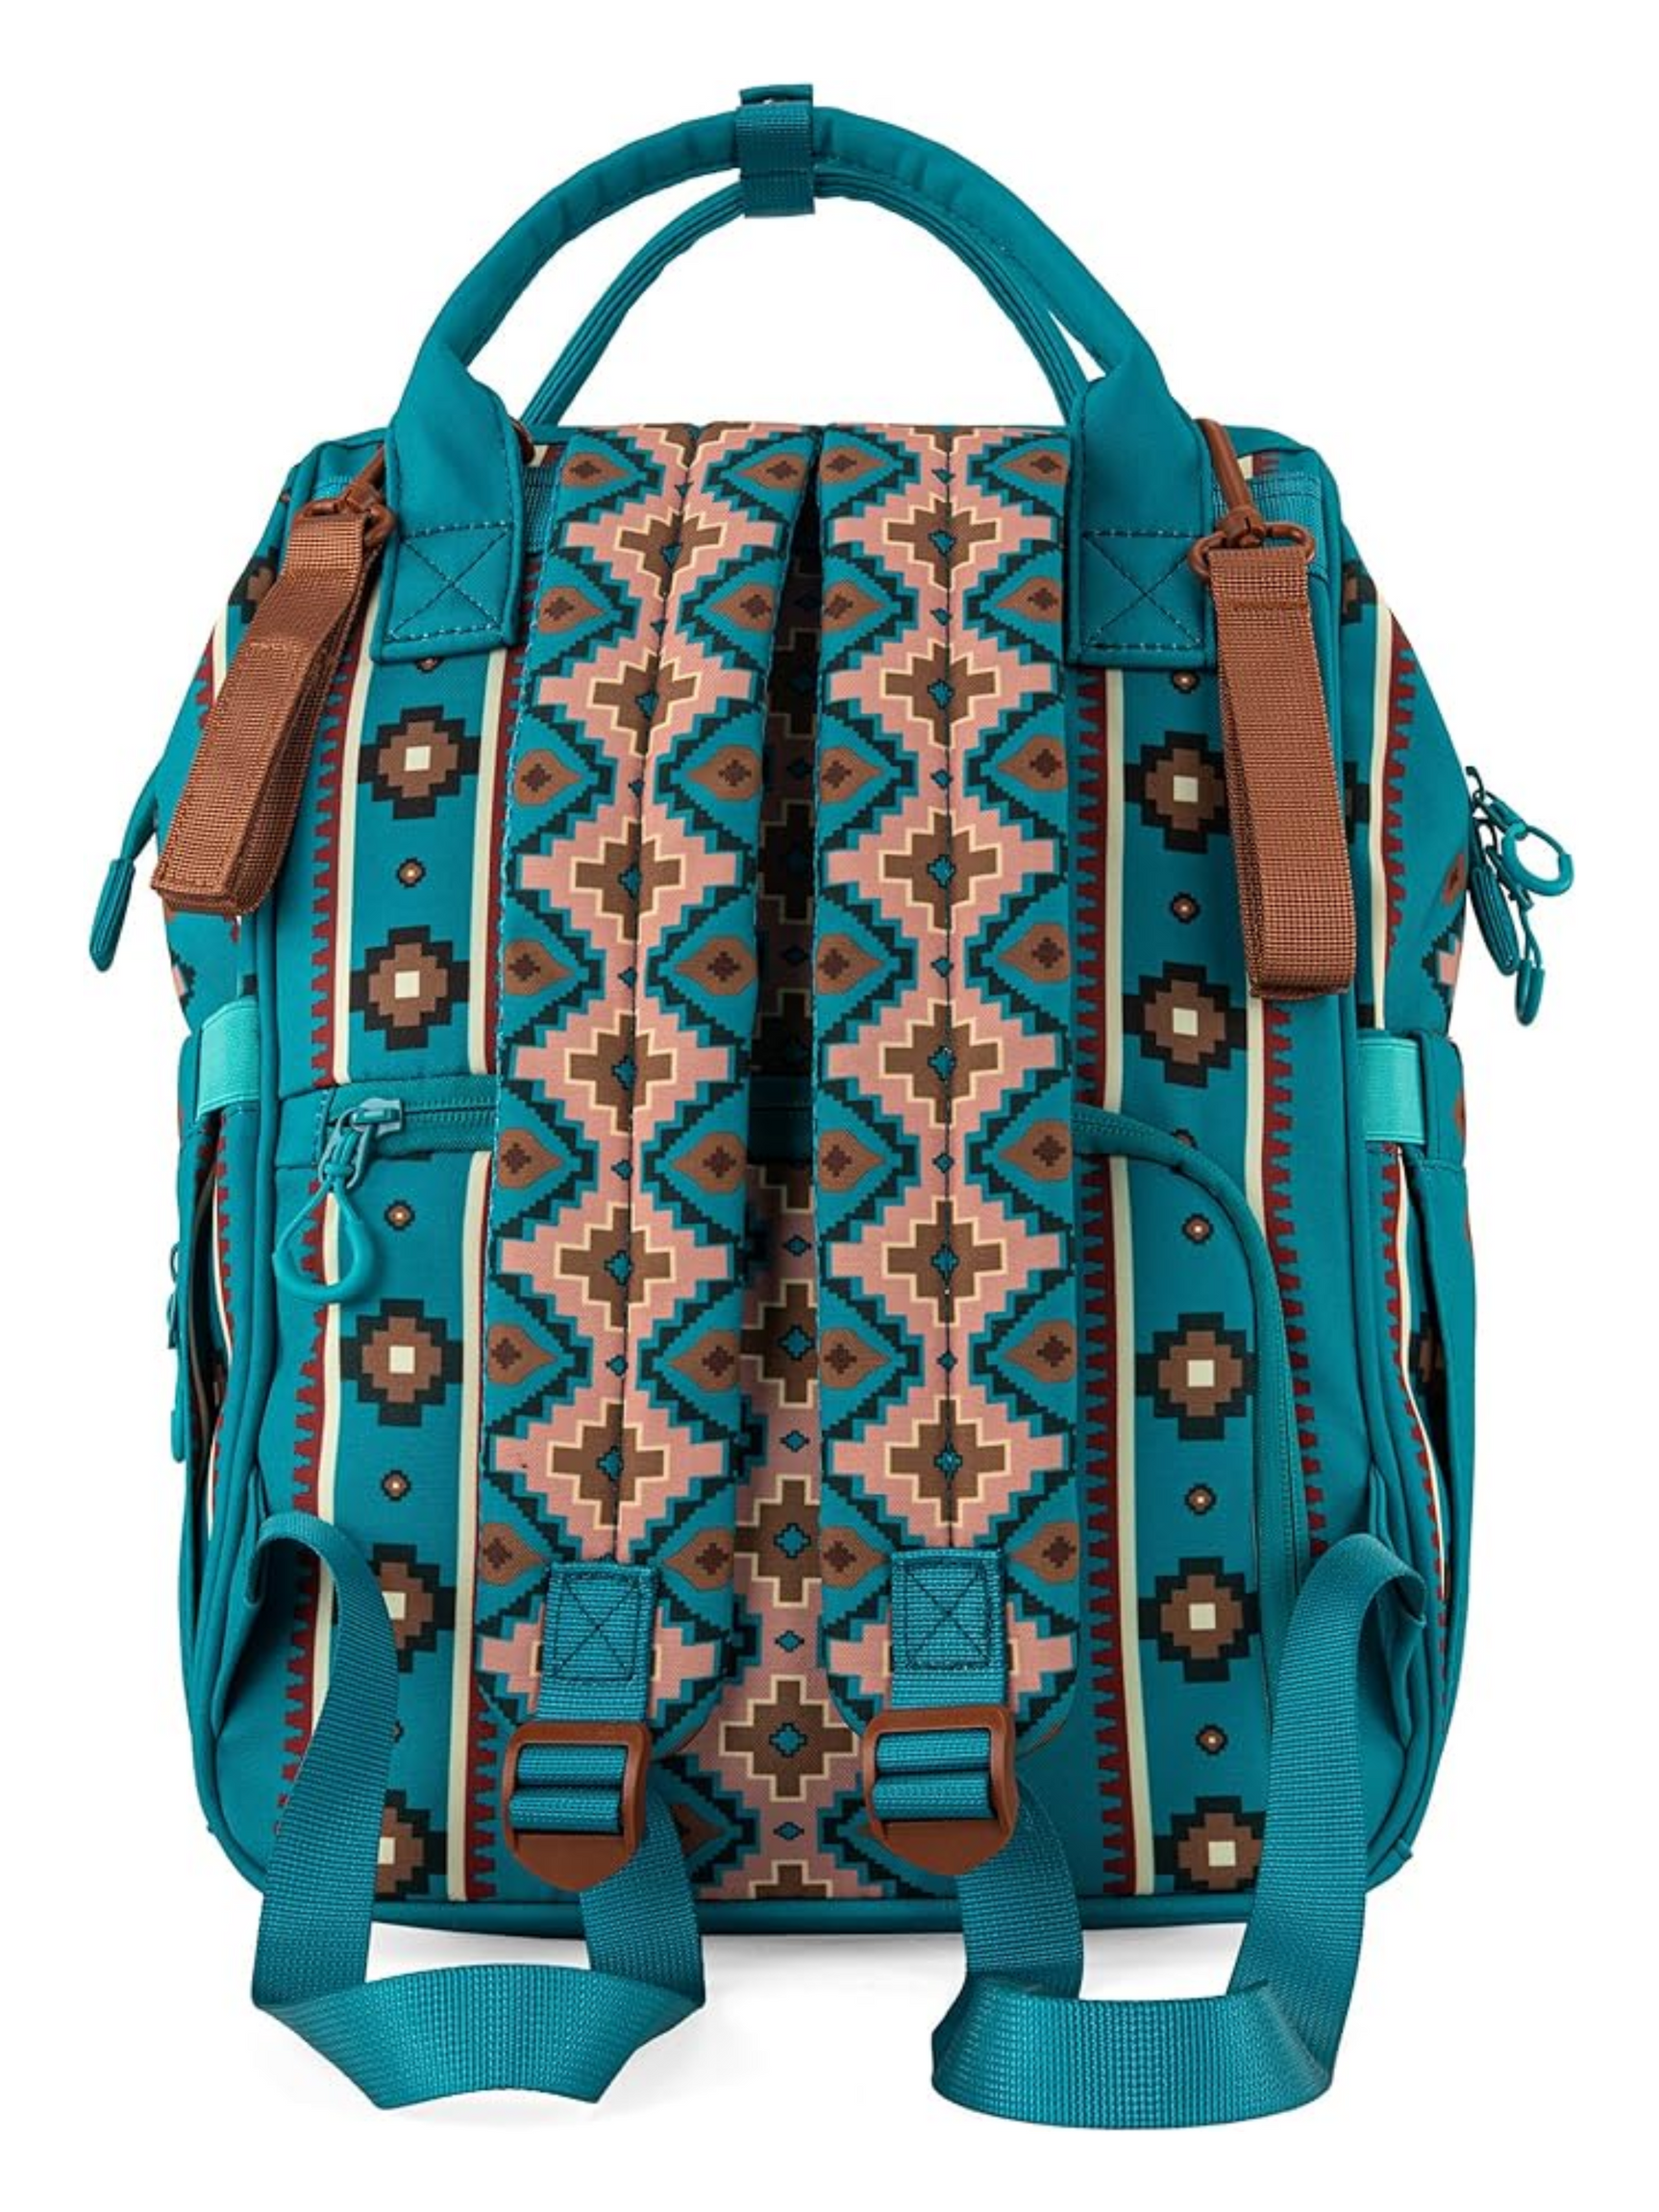 Sac à Dos Aztec Allover Turquoise